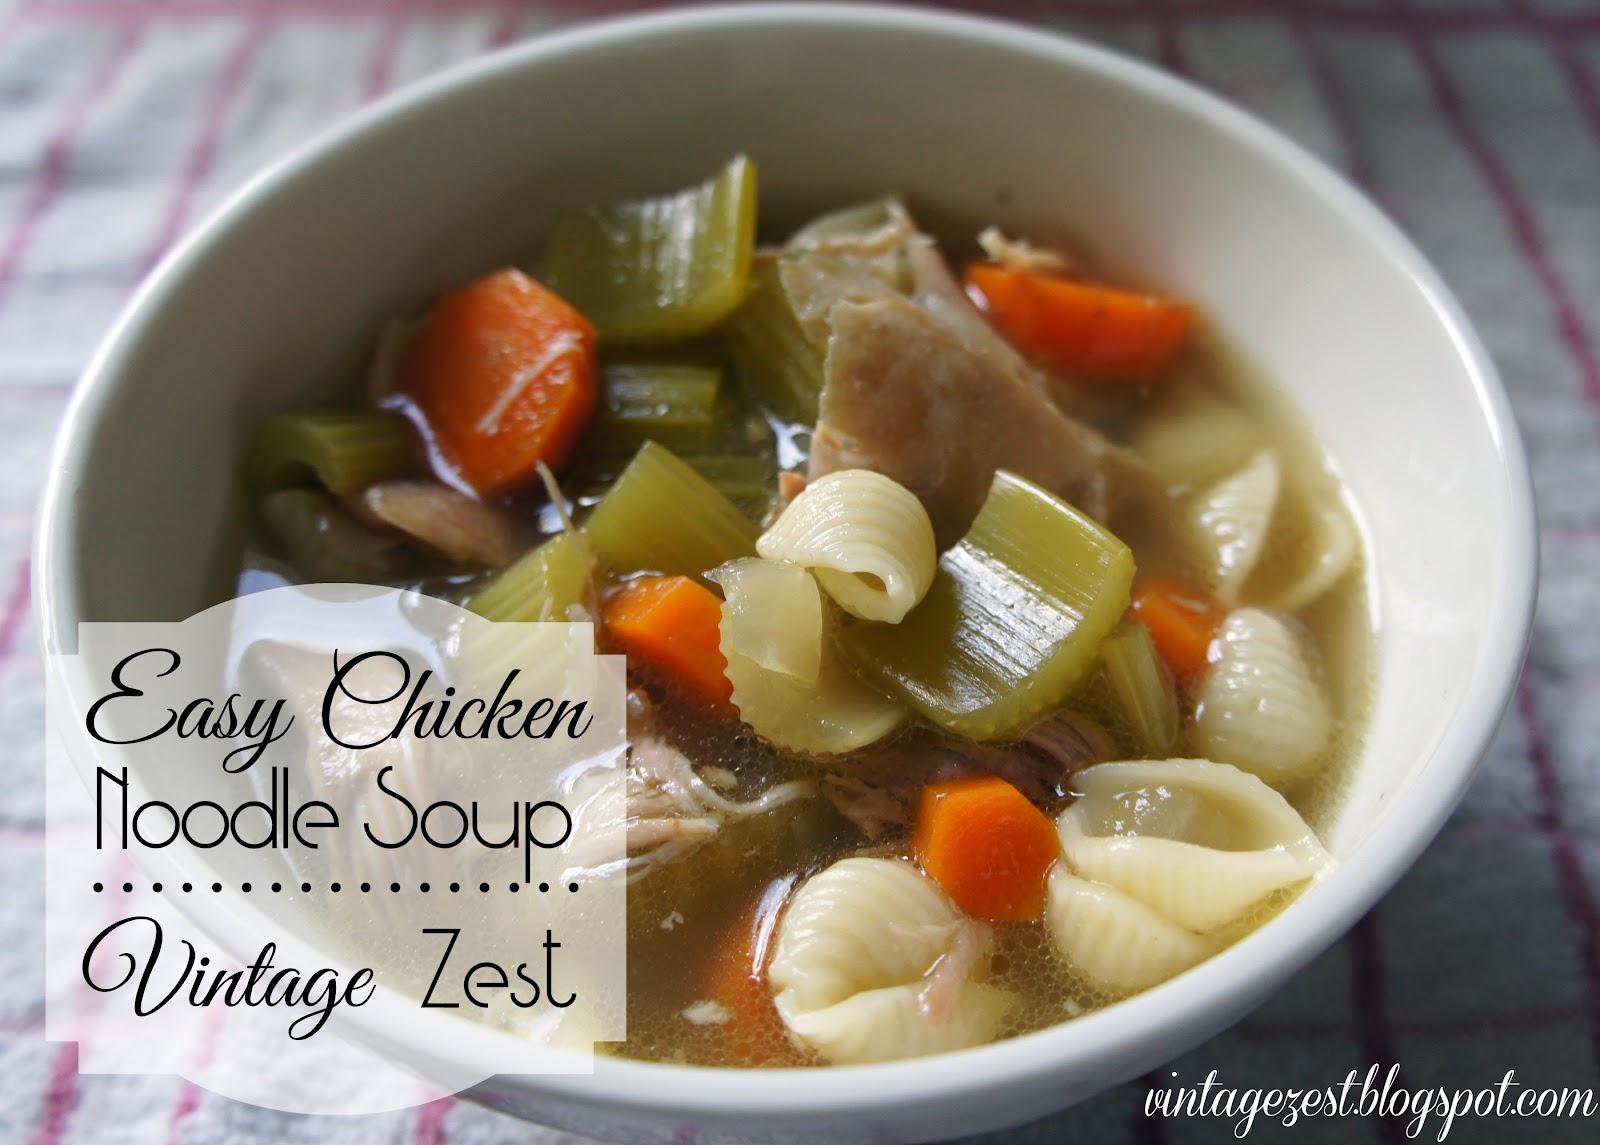 Easy & Healthy Homemade Chicken Noodle Soup ~ Diane's Vintage Zest!